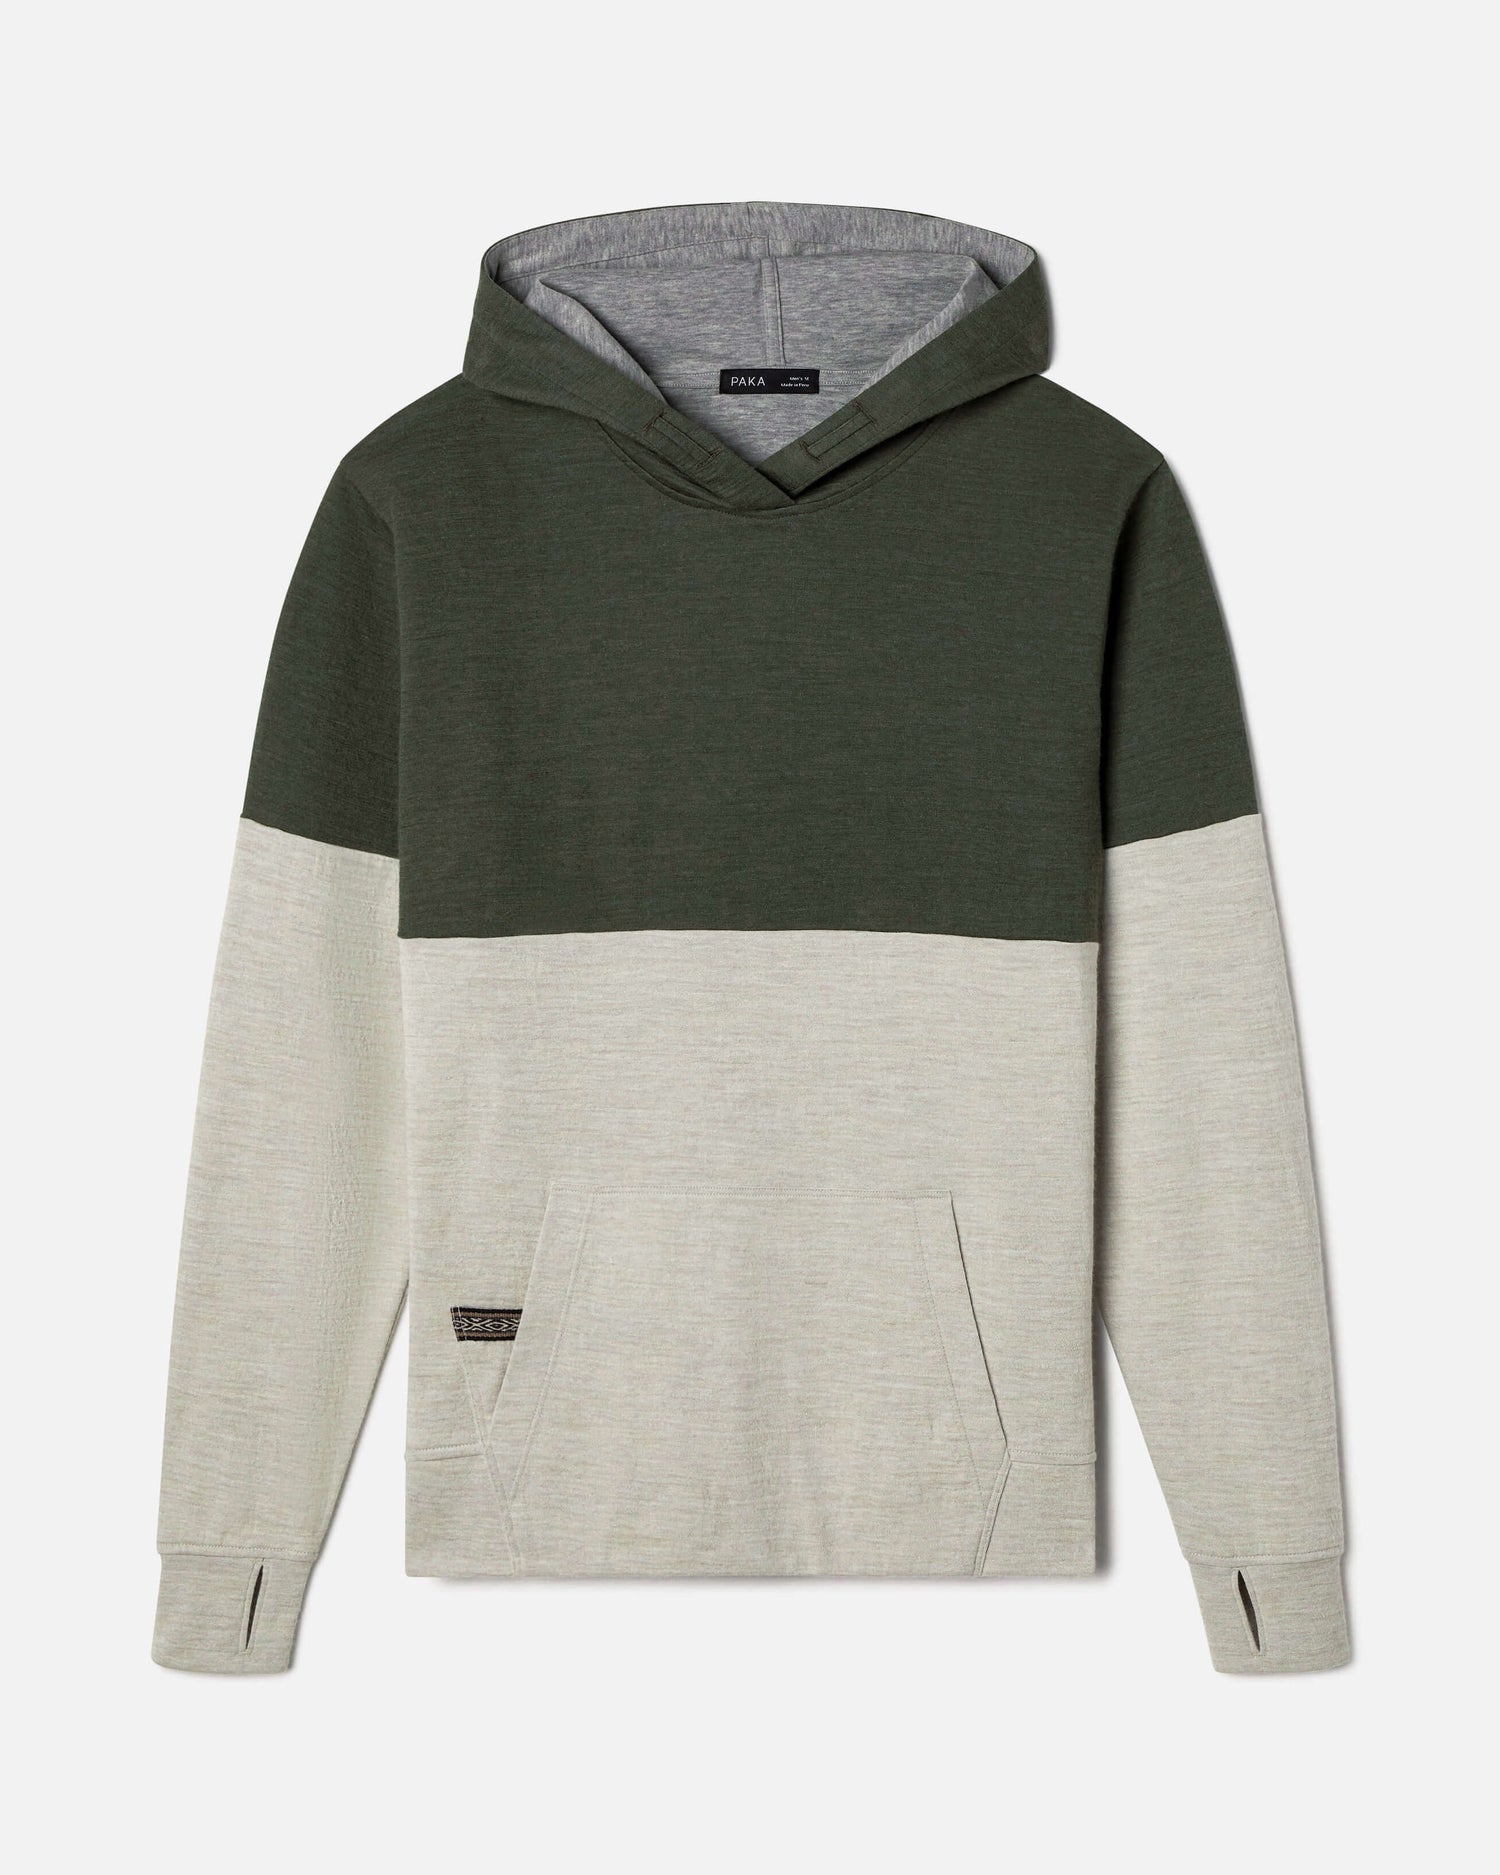 Men's Breathe green and tan Hoodie with front pocket and grey interior